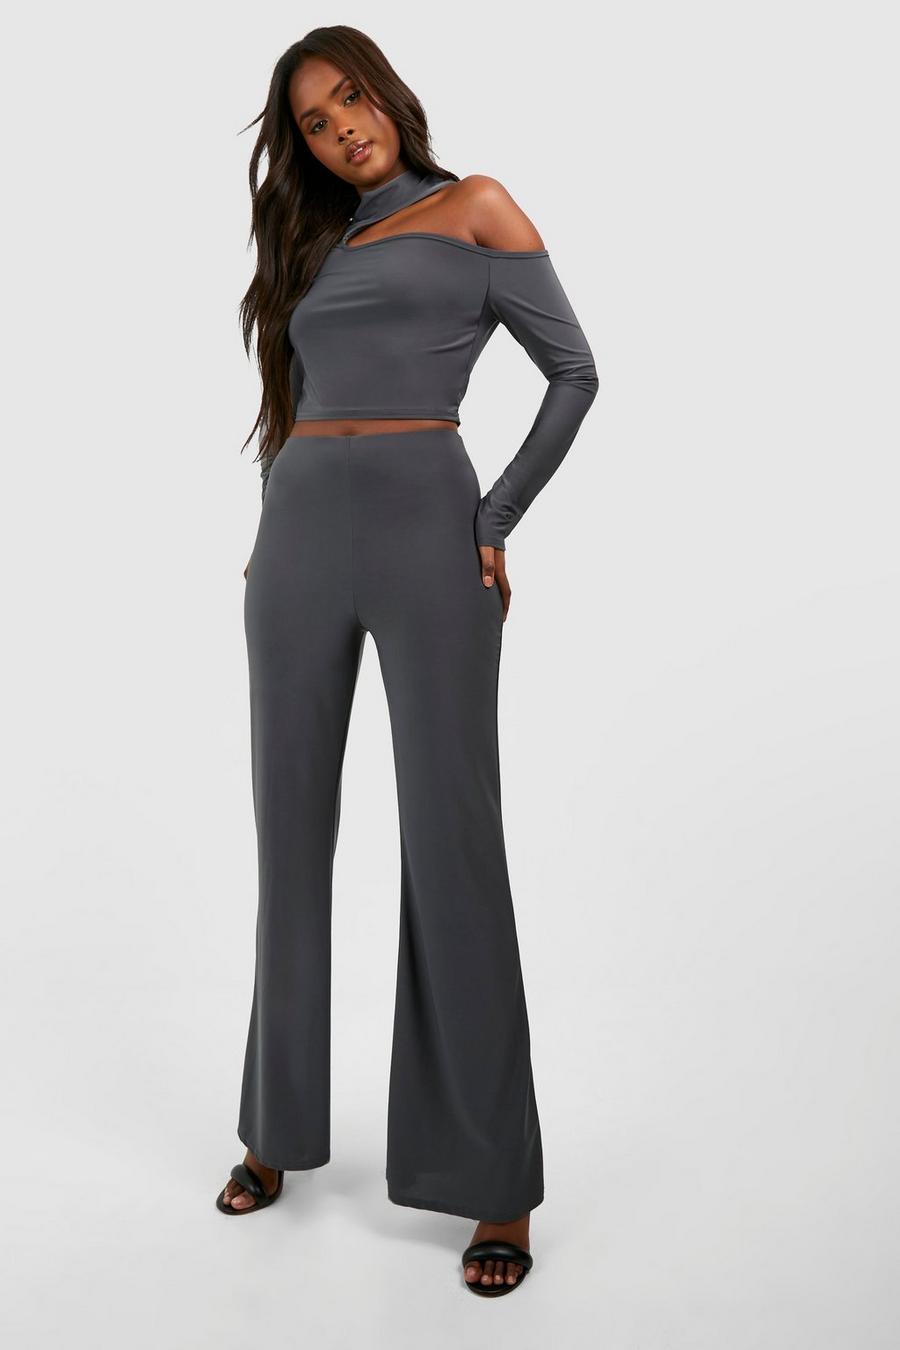 Slate High Neck Cut Out Long Sleeve Top & Flared Pants